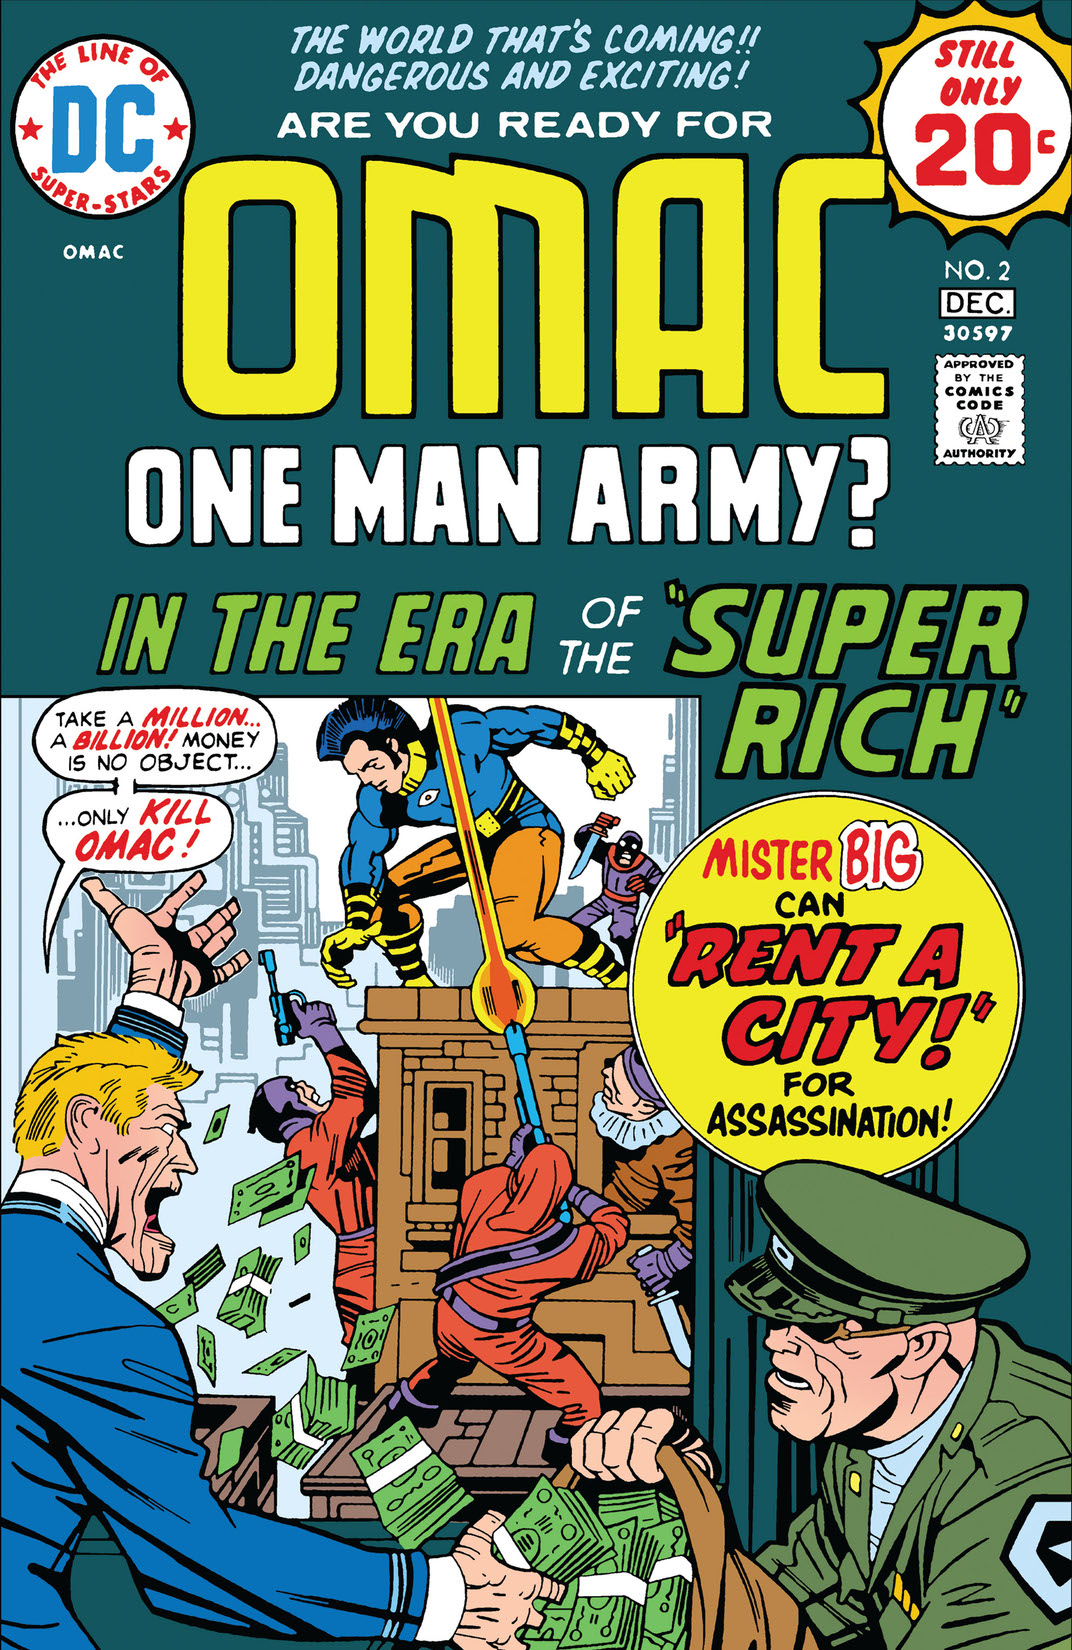 O.M.A.C. (1974-) #2 preview images